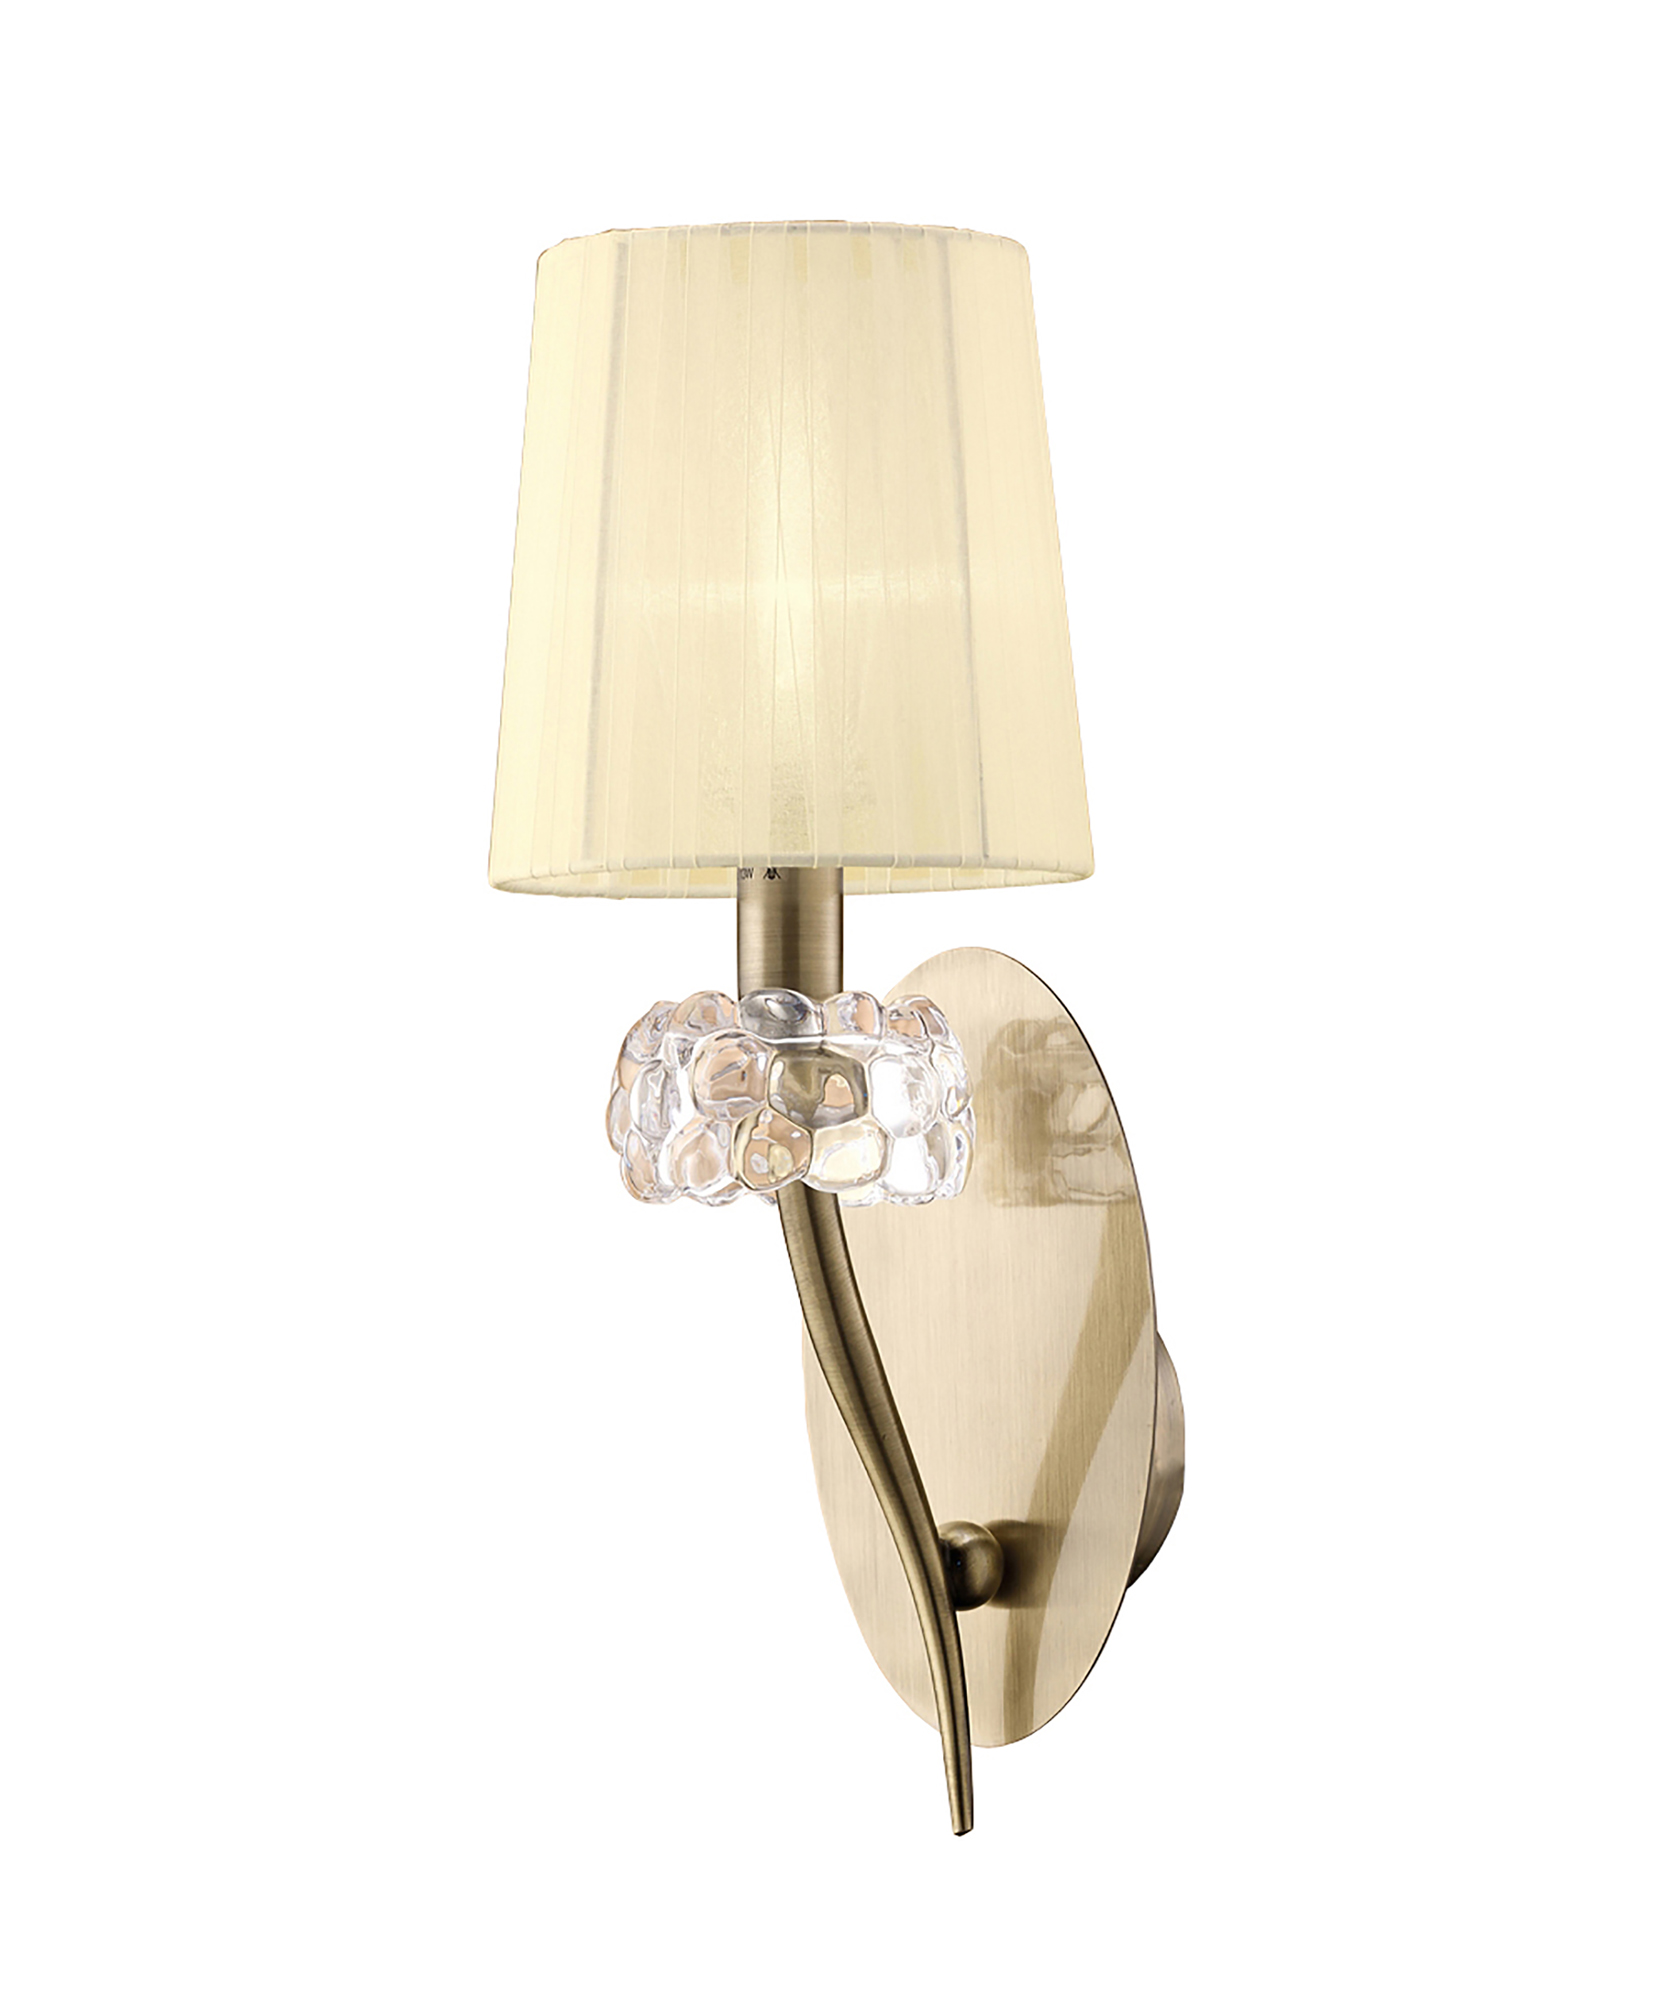 M4635AB/S  Loewe AB Switched Wall Lamp 1 Light